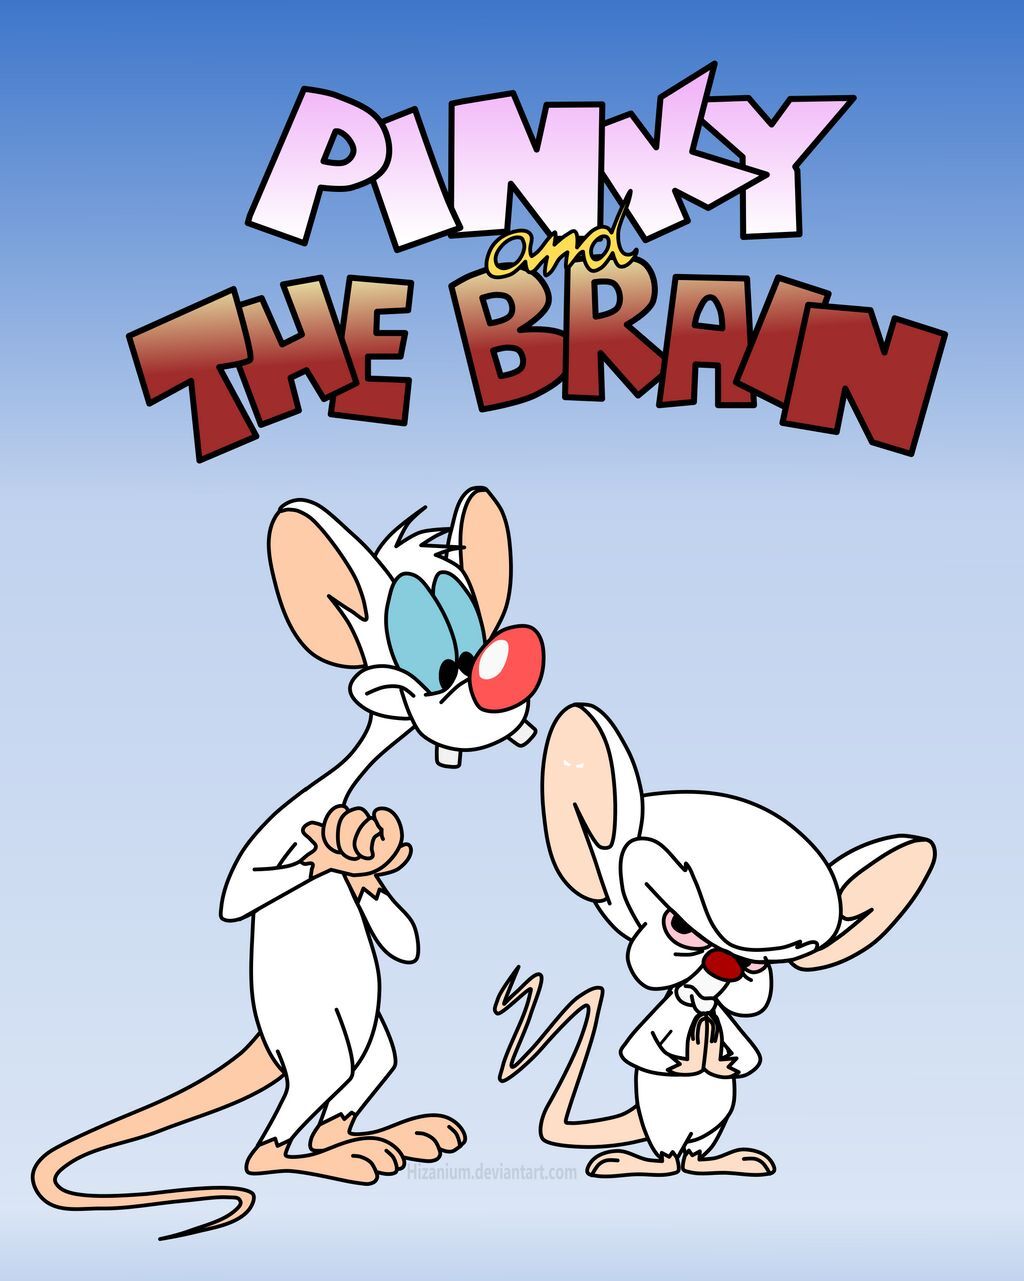 Pinky and the Brain (1995) -, Synopsis, Characteristics, Moods, Themes and  Related